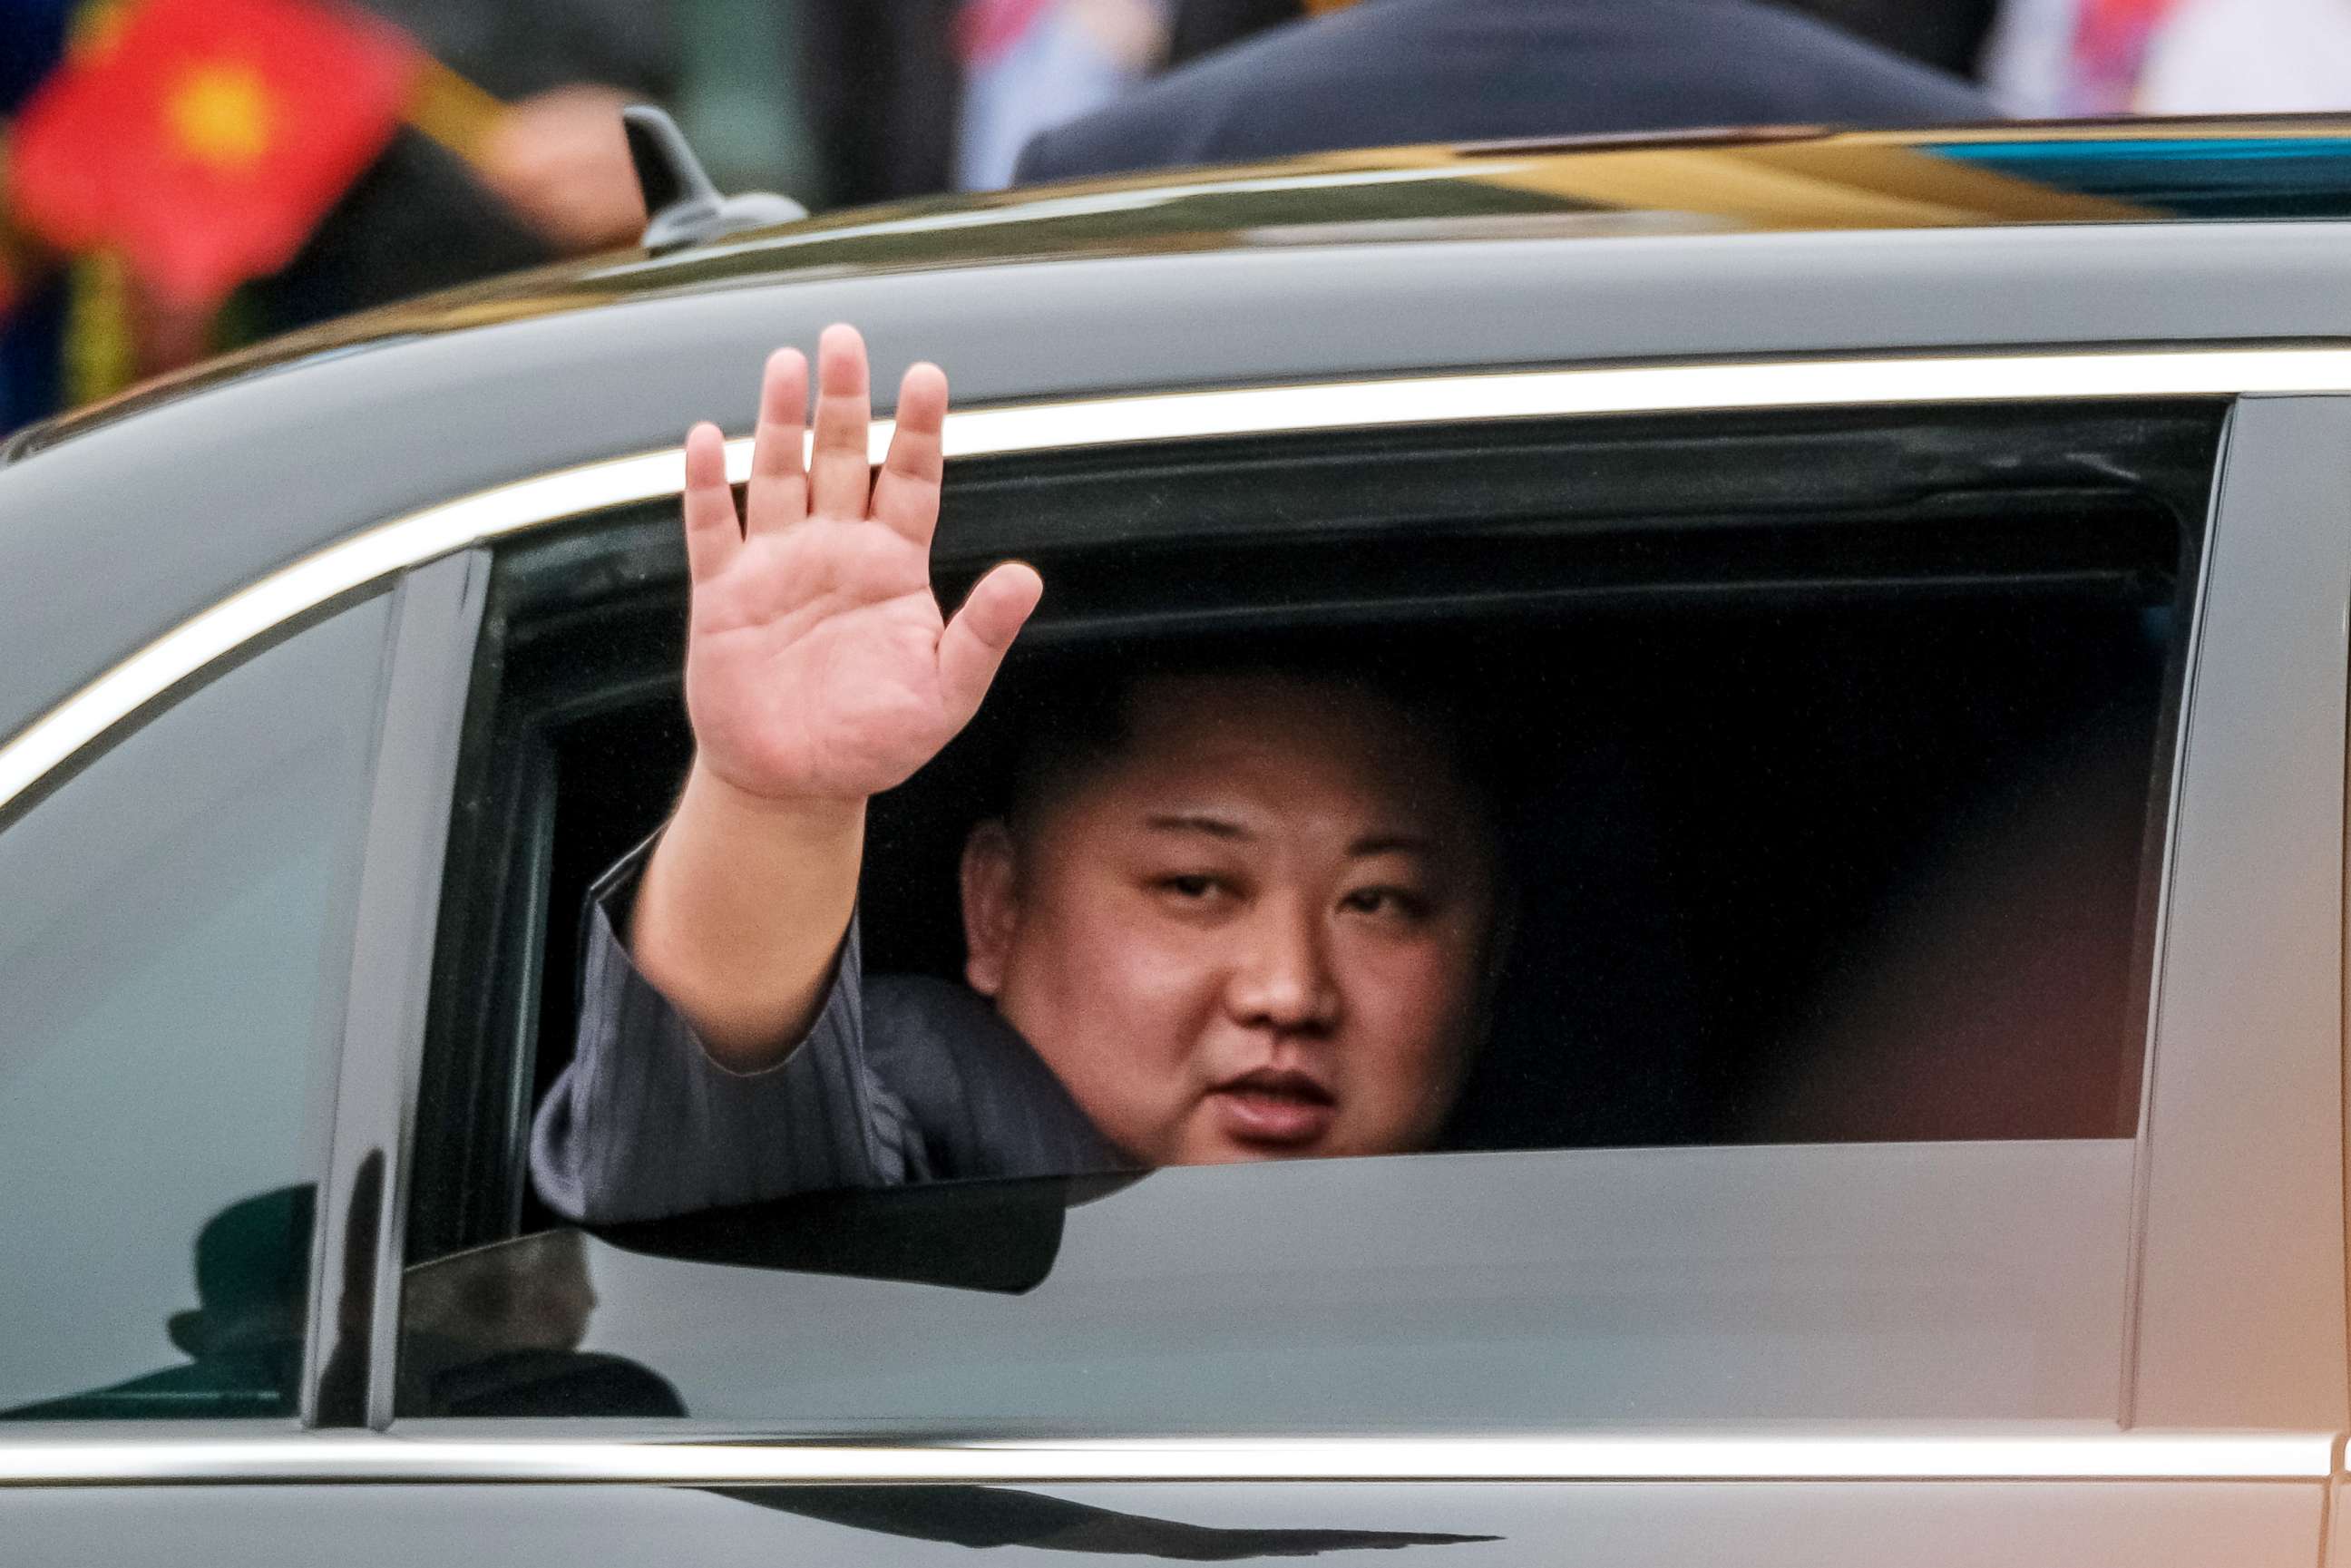 PHOTO: Kim Jong-Un waves from his car after arriving by train at Dong Dang railway station in Vietnam near the border with China, Feb. 26, 2019, ahead of the summit with President Donald Trump.